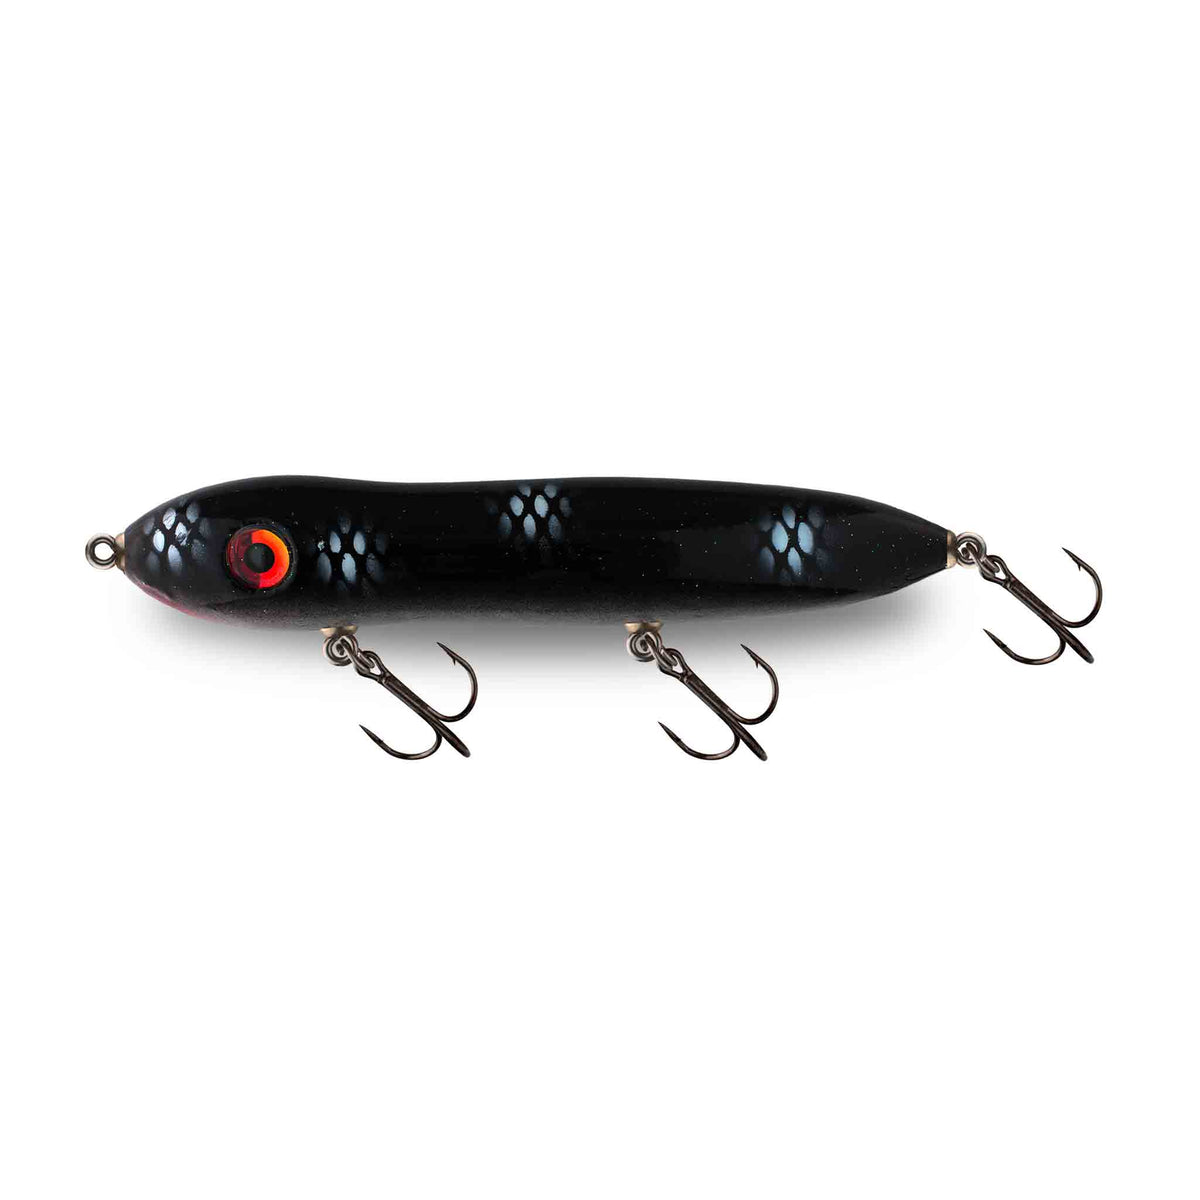 Bass Lure Crazy snake head 140mm 26g zig zag surface action